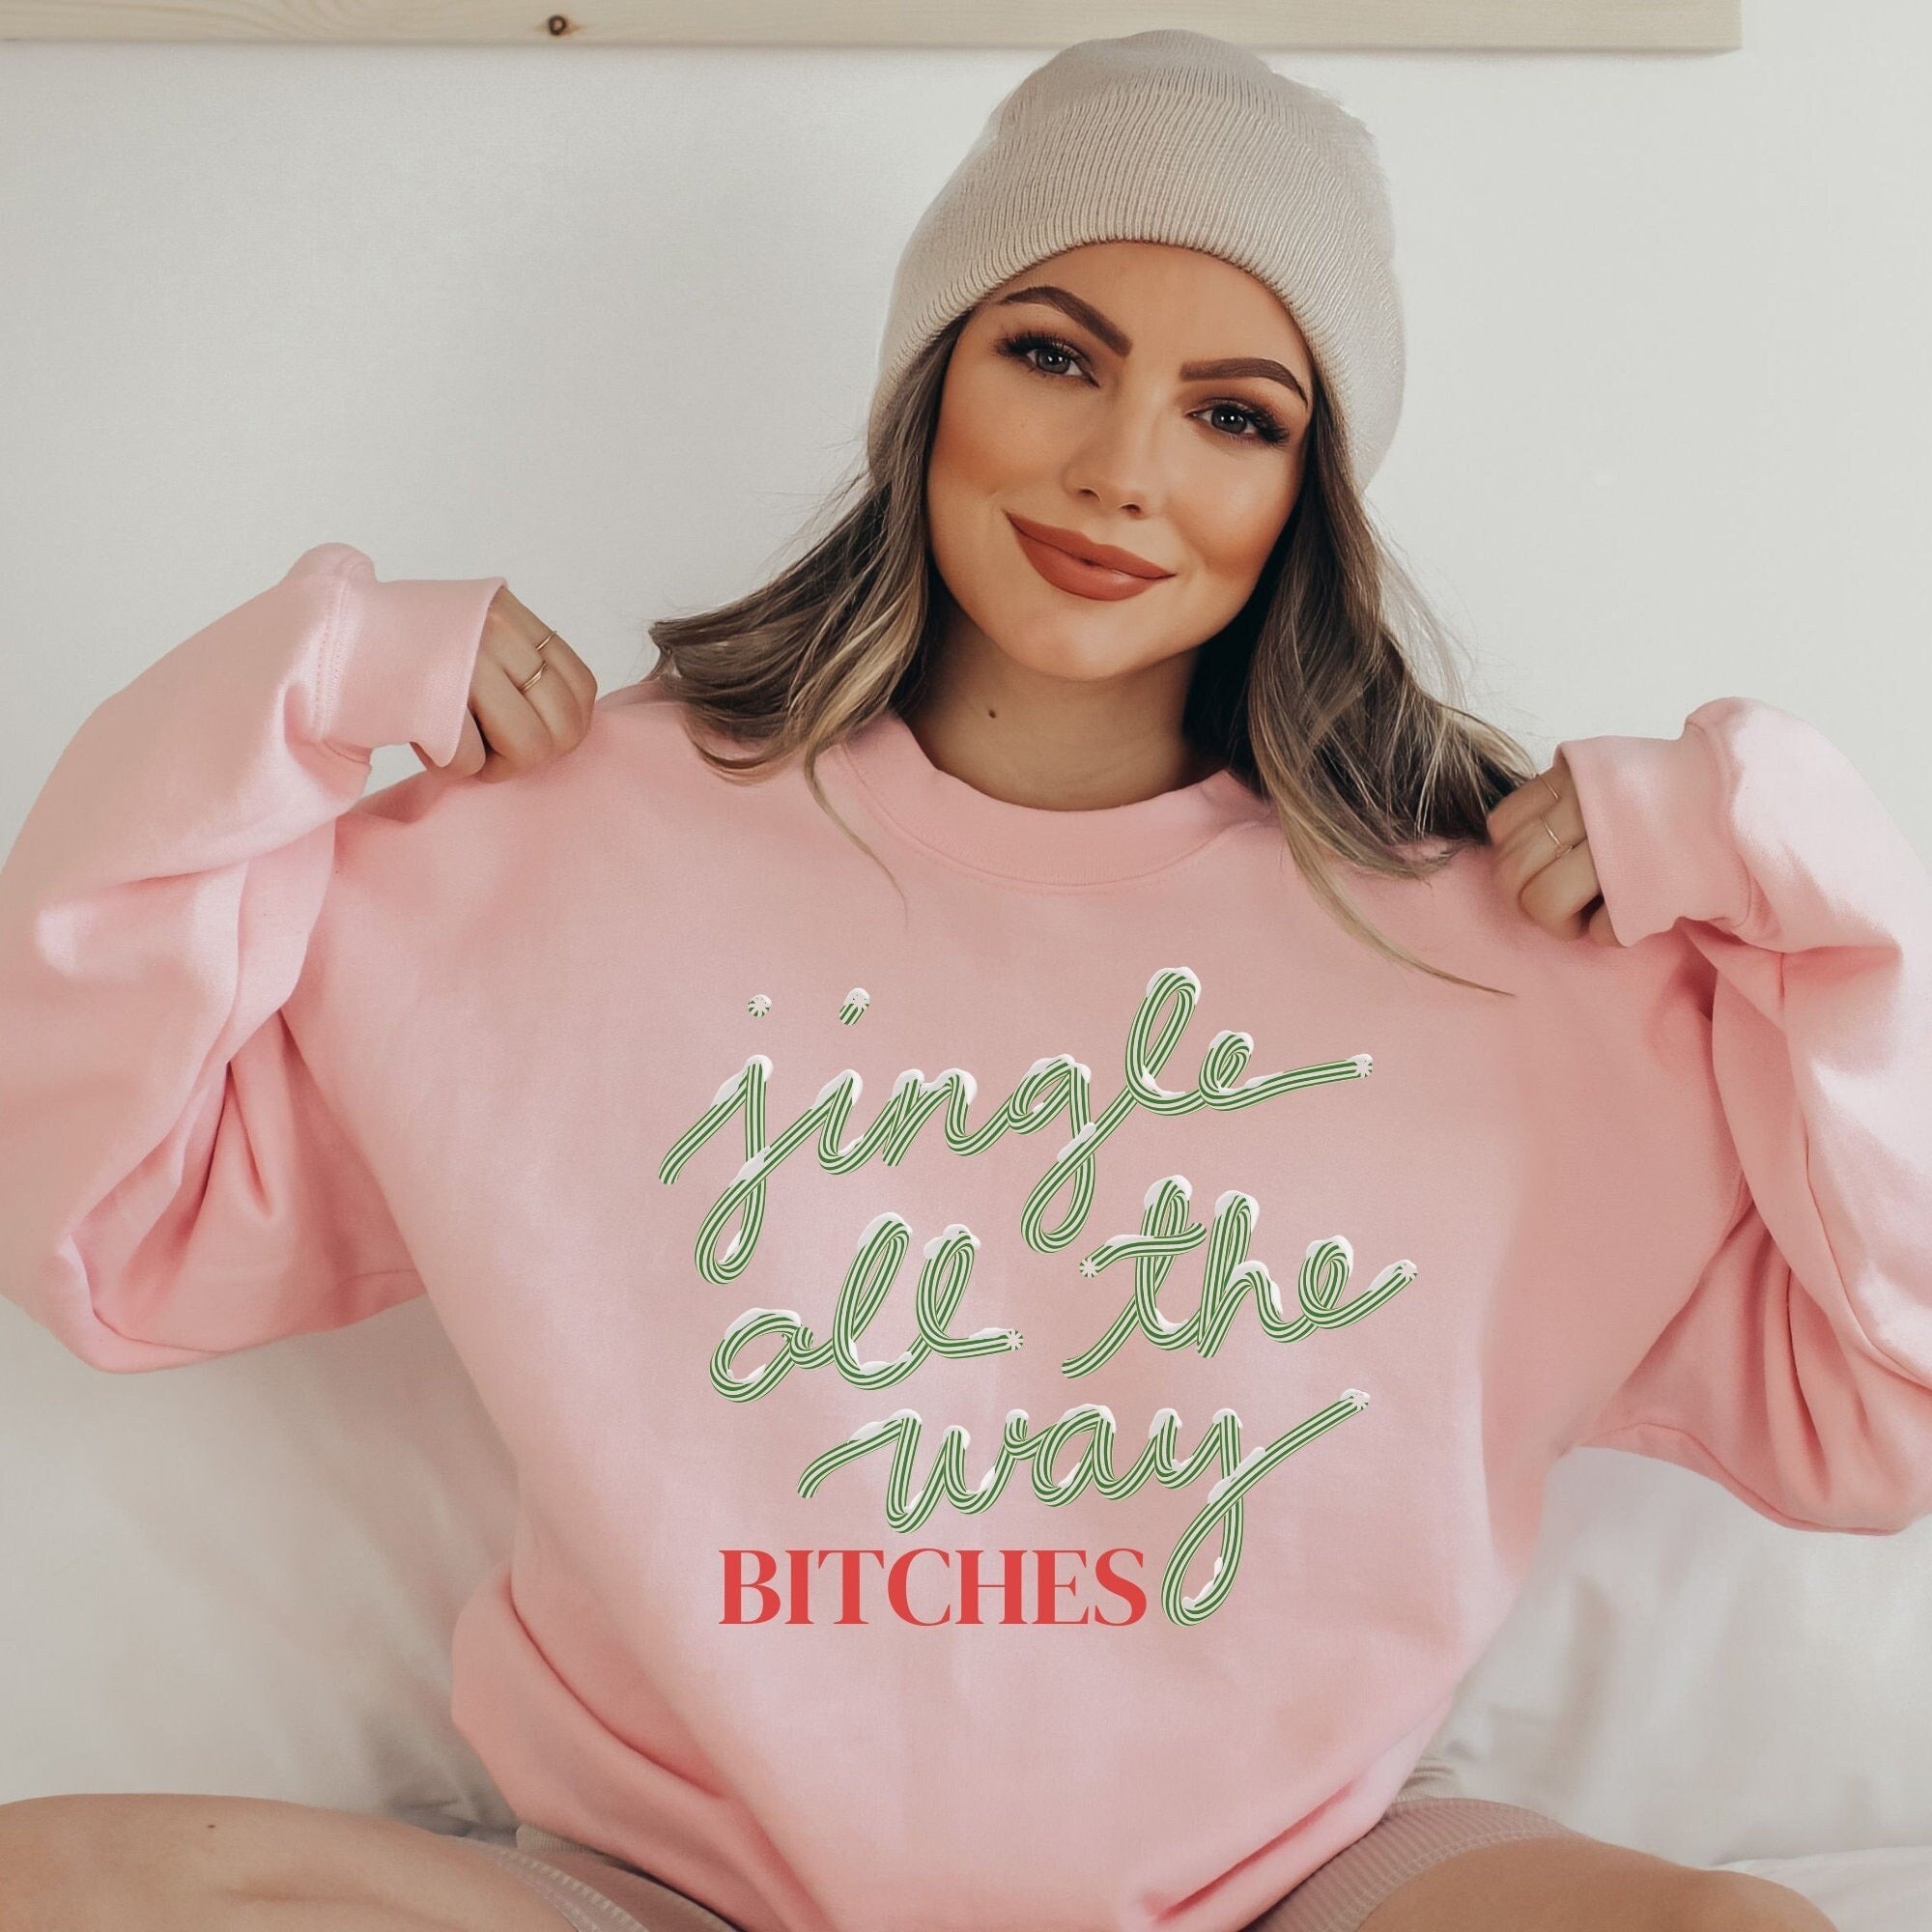 Jingle All The Way Bitches Sweater